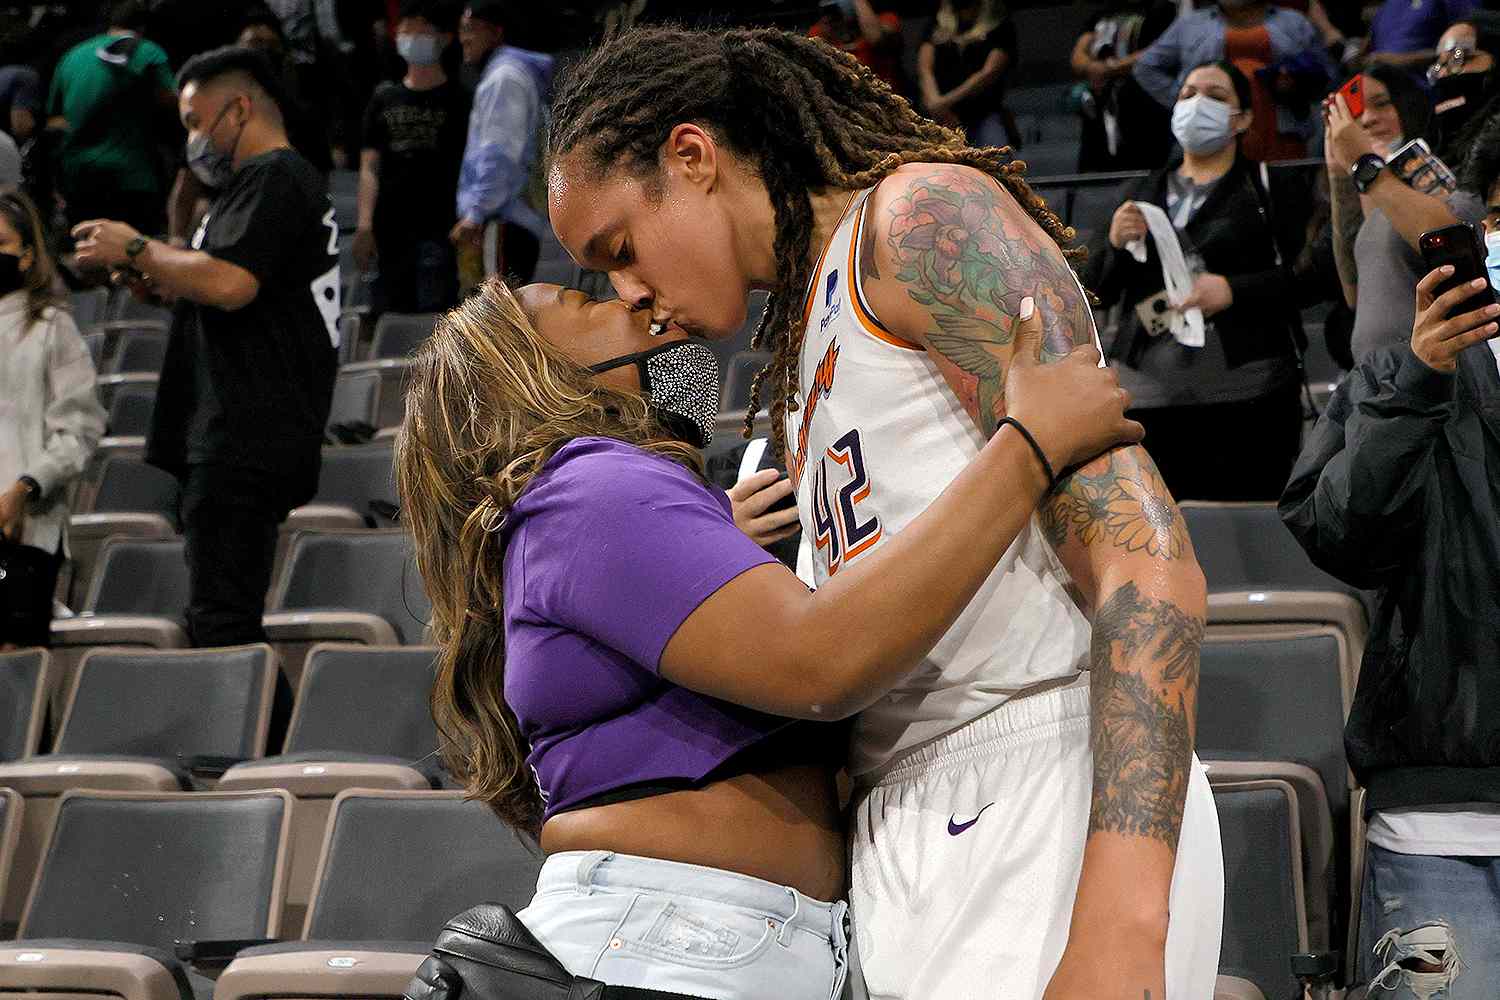 Brittney Griner #42 of the Phoenix Mercury kisses her wife Cherelle Griner in the stands after the Mercury defeated the Las Vegas Aces 87-84 in Game Five of the 2021 WNBA Playoffs semifinals to win the series at Michelob ULTRA Arena on October 8, 2021 in Las Vegas, Nevada.